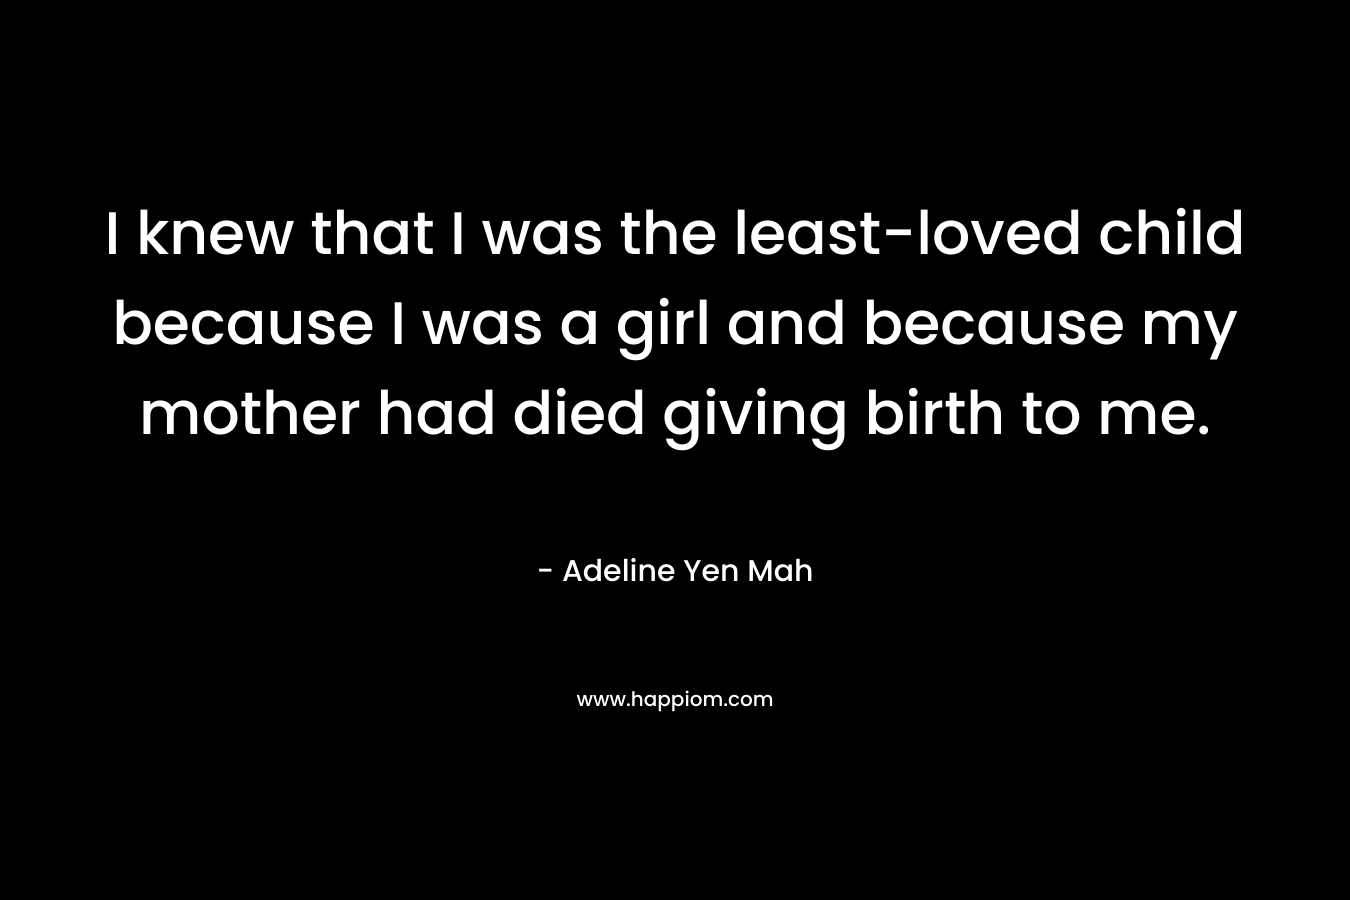 I knew that I was the least-loved child because I was a girl and because my mother had died giving birth to me.